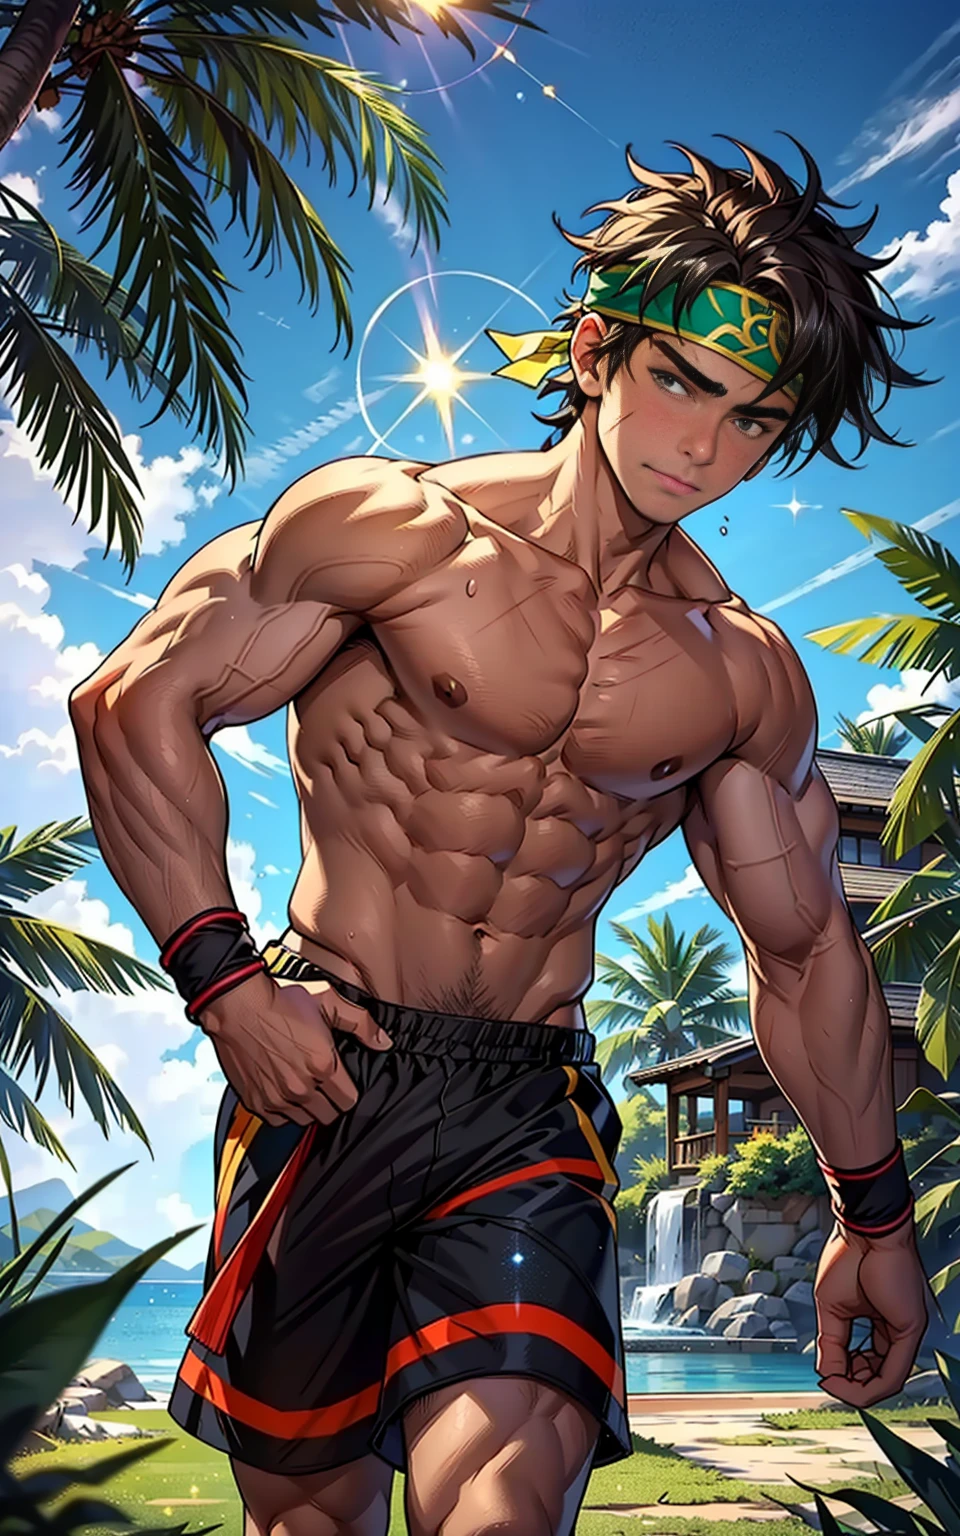 (Masterpiece, Best quality 12 year old boy，Shota), 1boys, Young,Muscular, Short hair, Intricate, Grass, full bodyesbian, Shirtless, Topless, Muscles sparkle in the sun,Black shorts, green headband, Vivid colors,(Depth of field:1.2),(Abs),wristband, dynamic pose, fighting, view the viewer, face forward